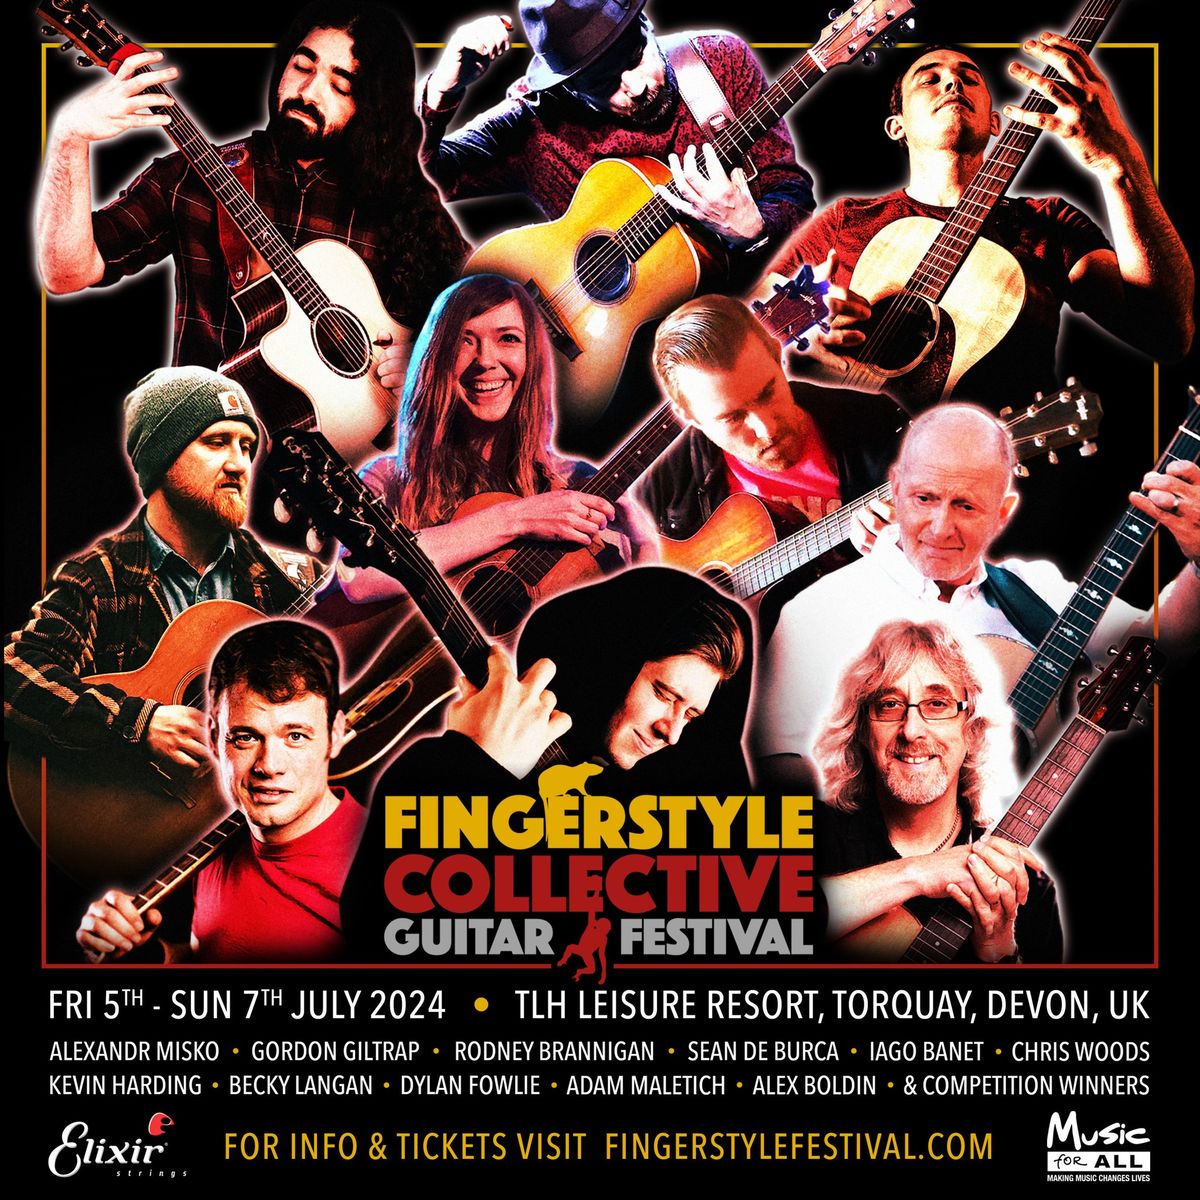 Fingerstyle Collective Guitar Festival UK